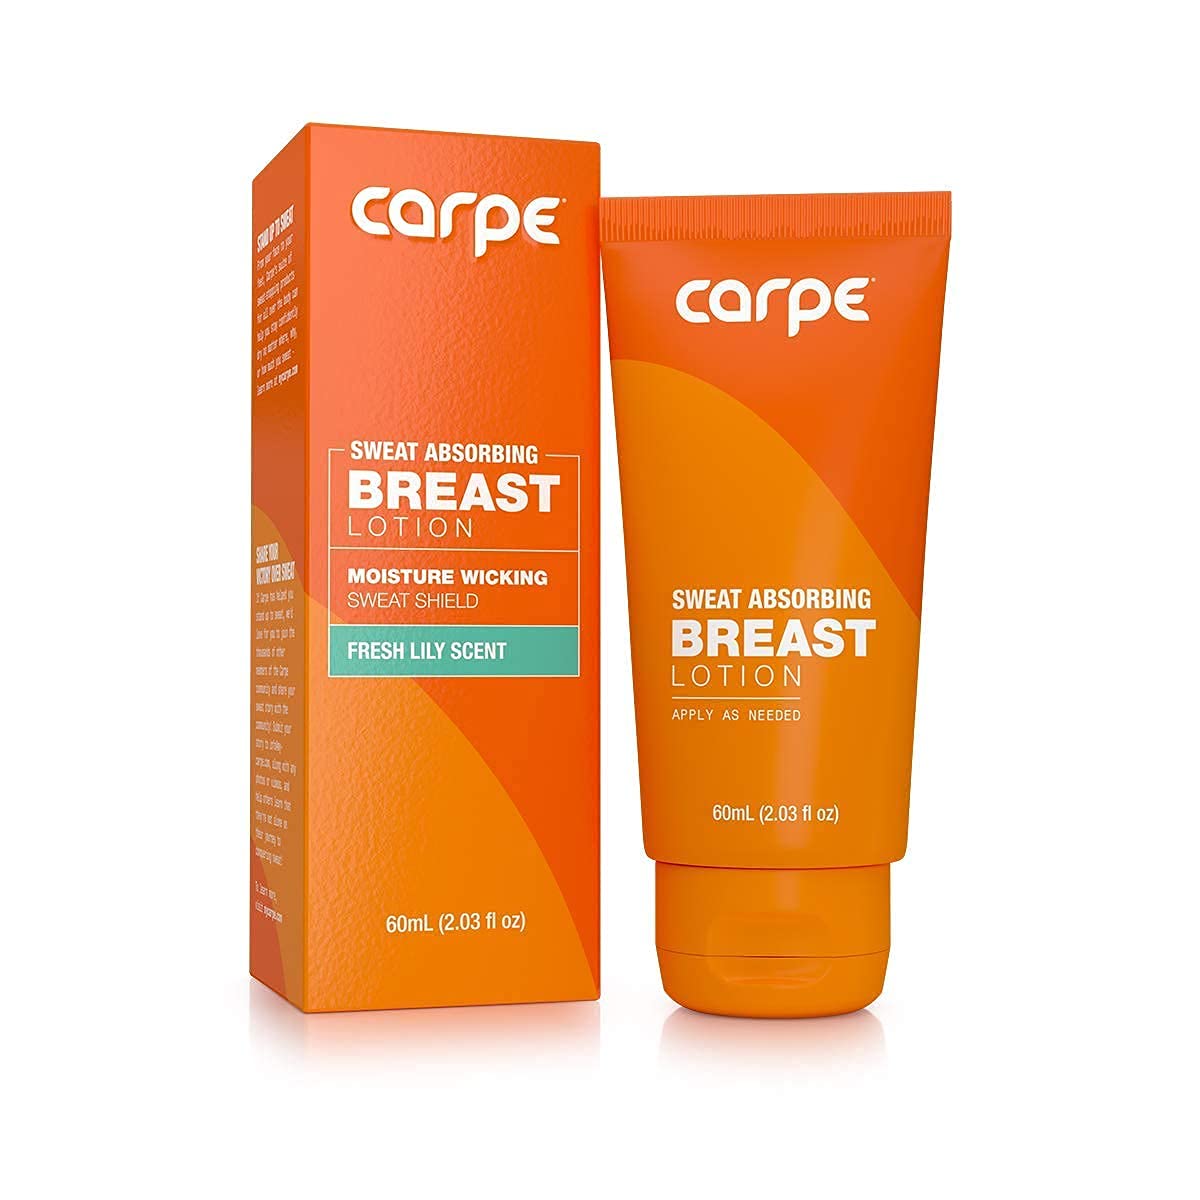 I Tried the Carpe Sweat-Absorbing Breast Lotion